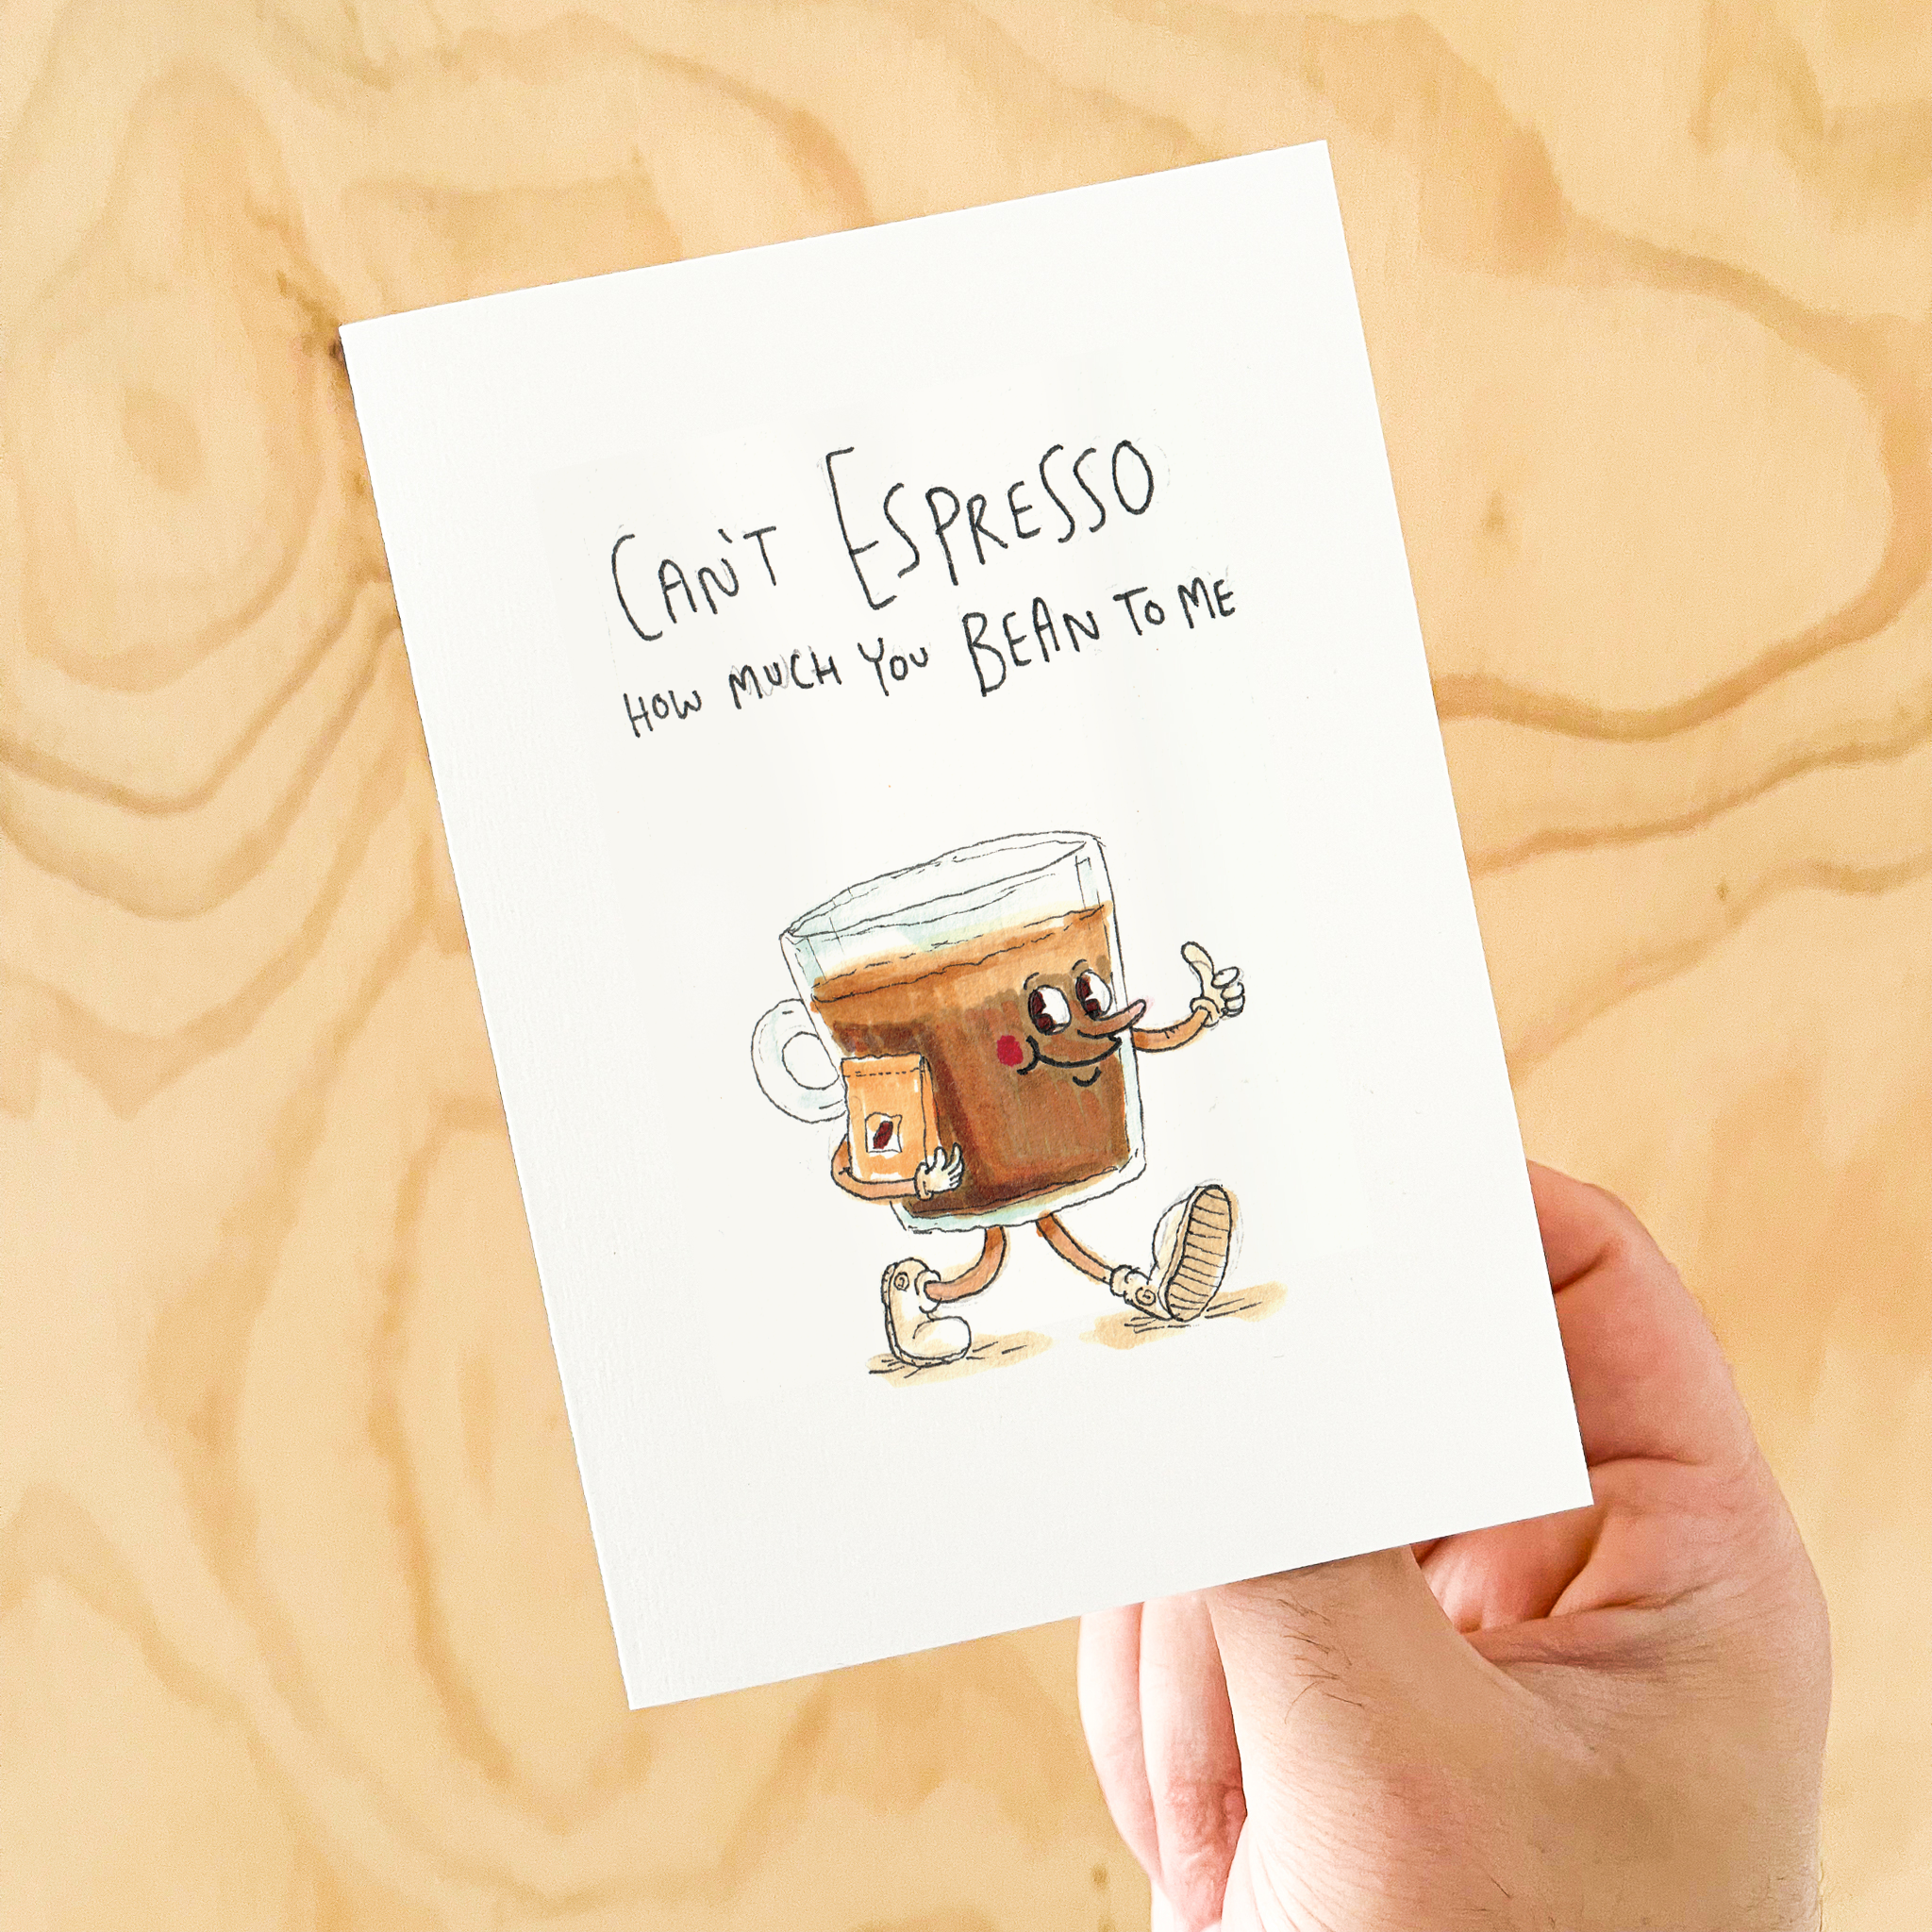 Can't Espresso How Much You Bean To Me - Well Drawn